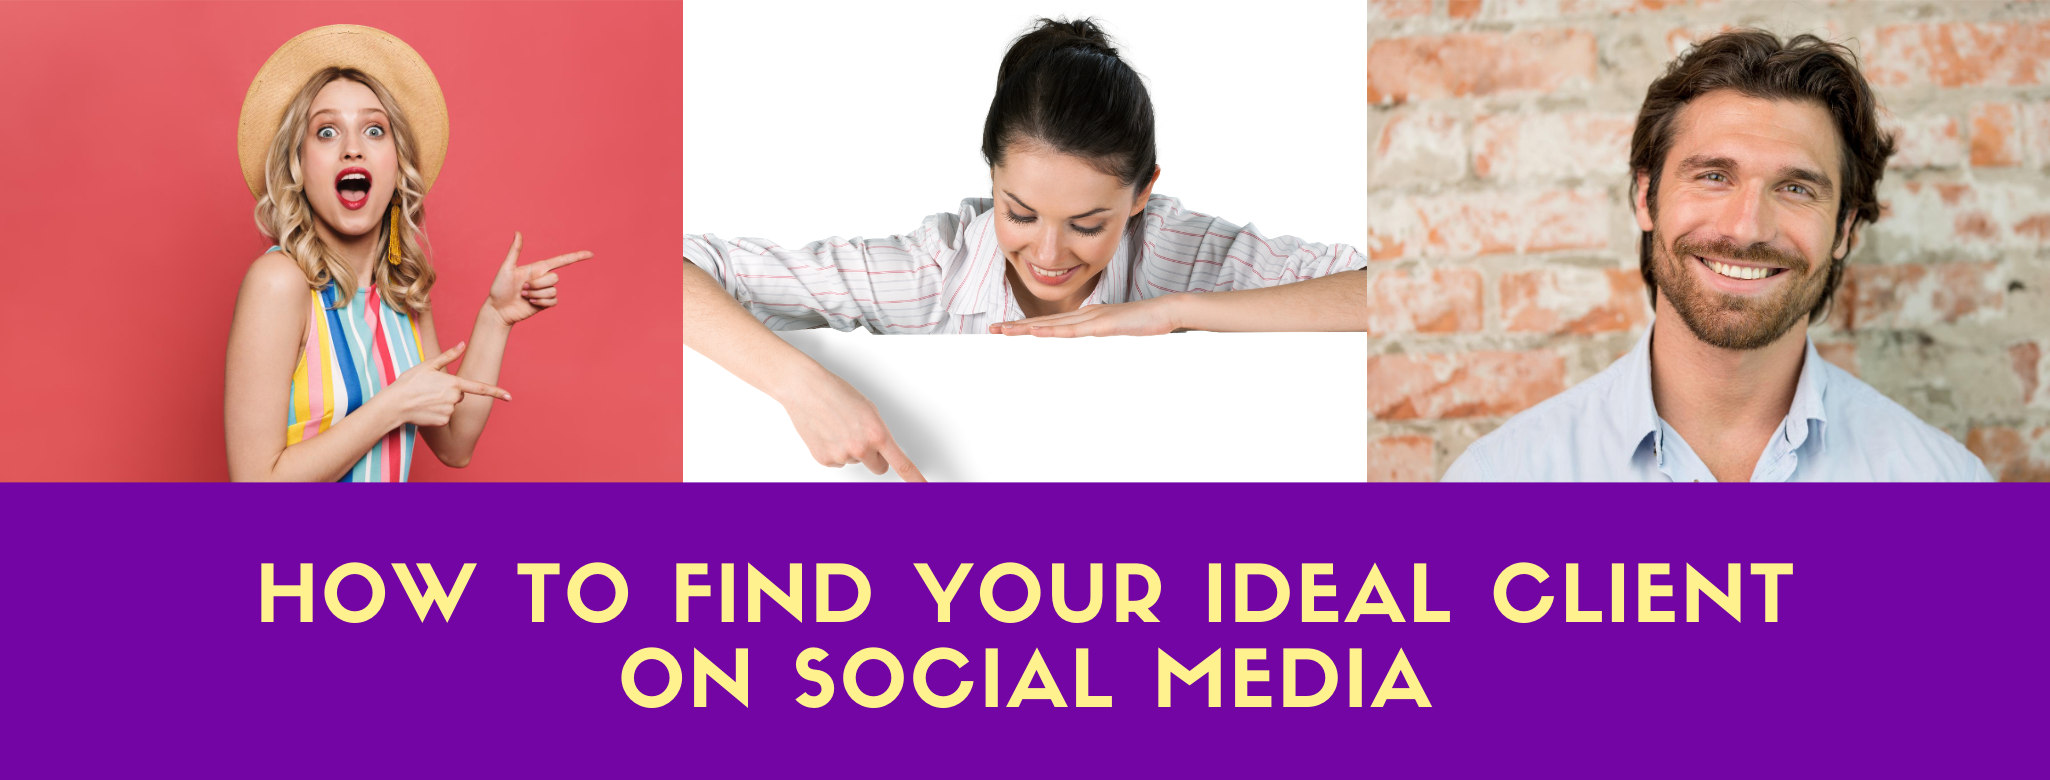 how to find your ideal client on social media